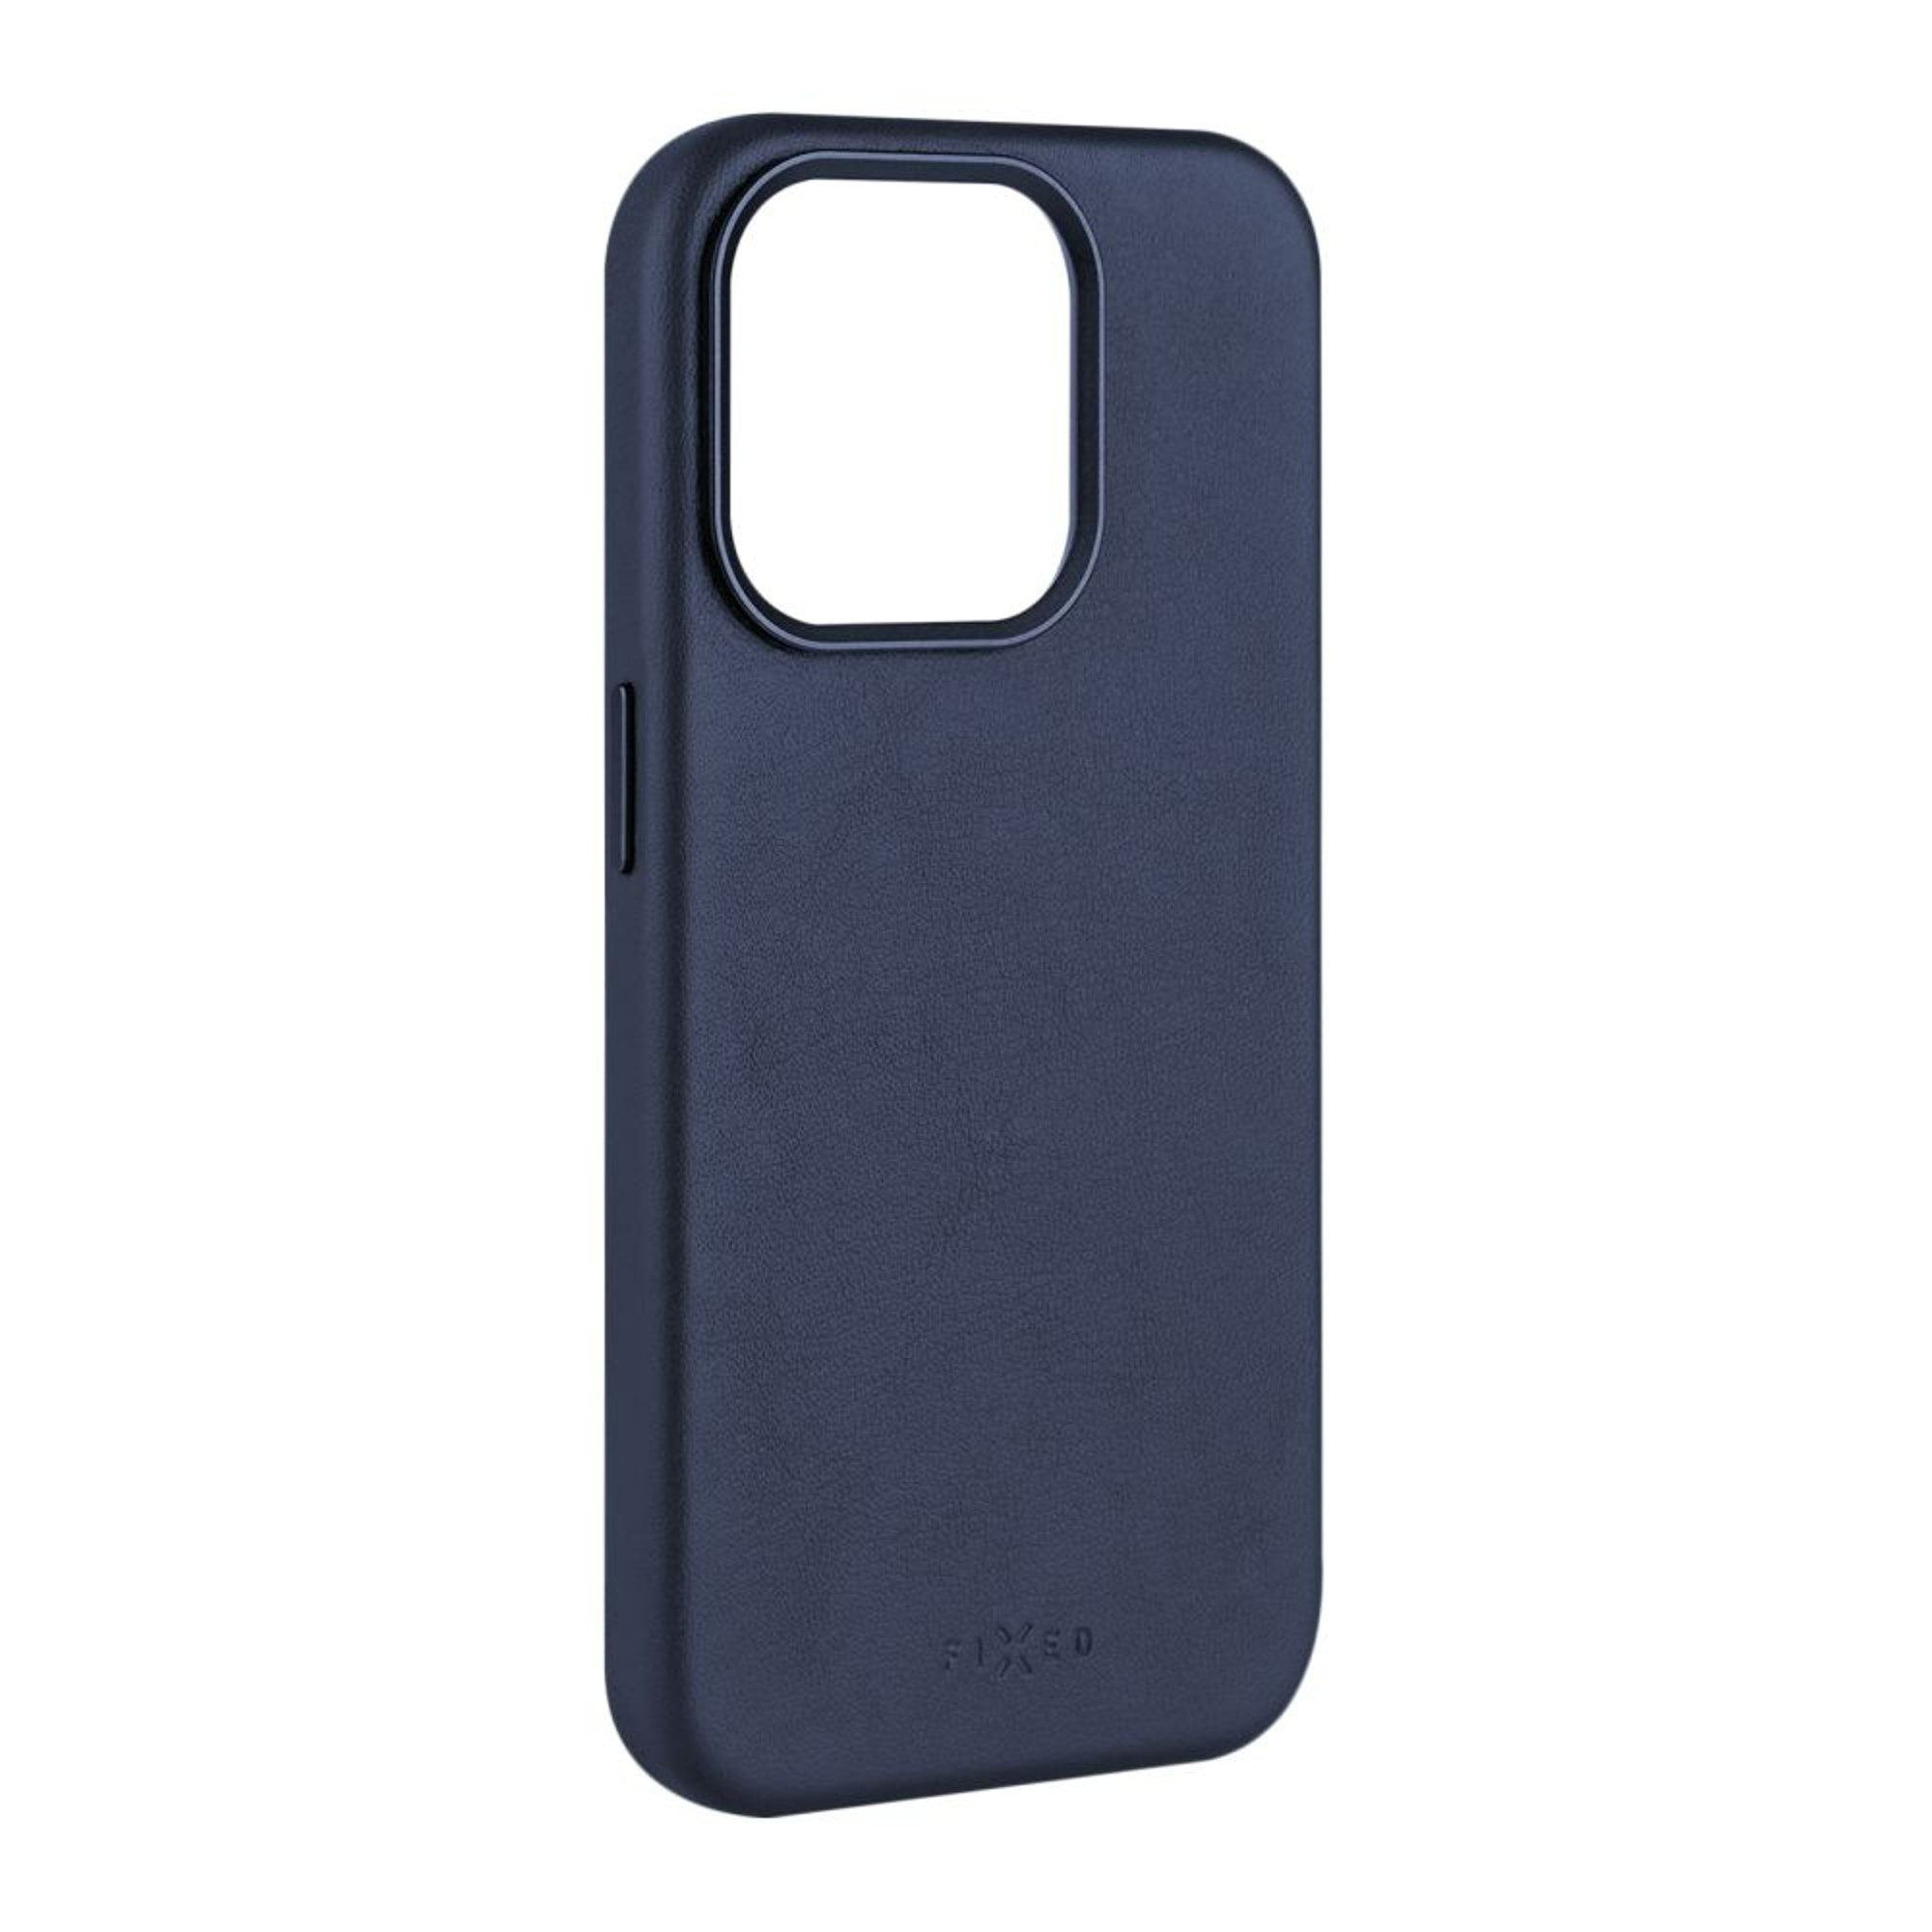 Apple, 15 FIXED Blau Max, MagLeather iPhone Pro Backcover, FIXLM-1203-BL,